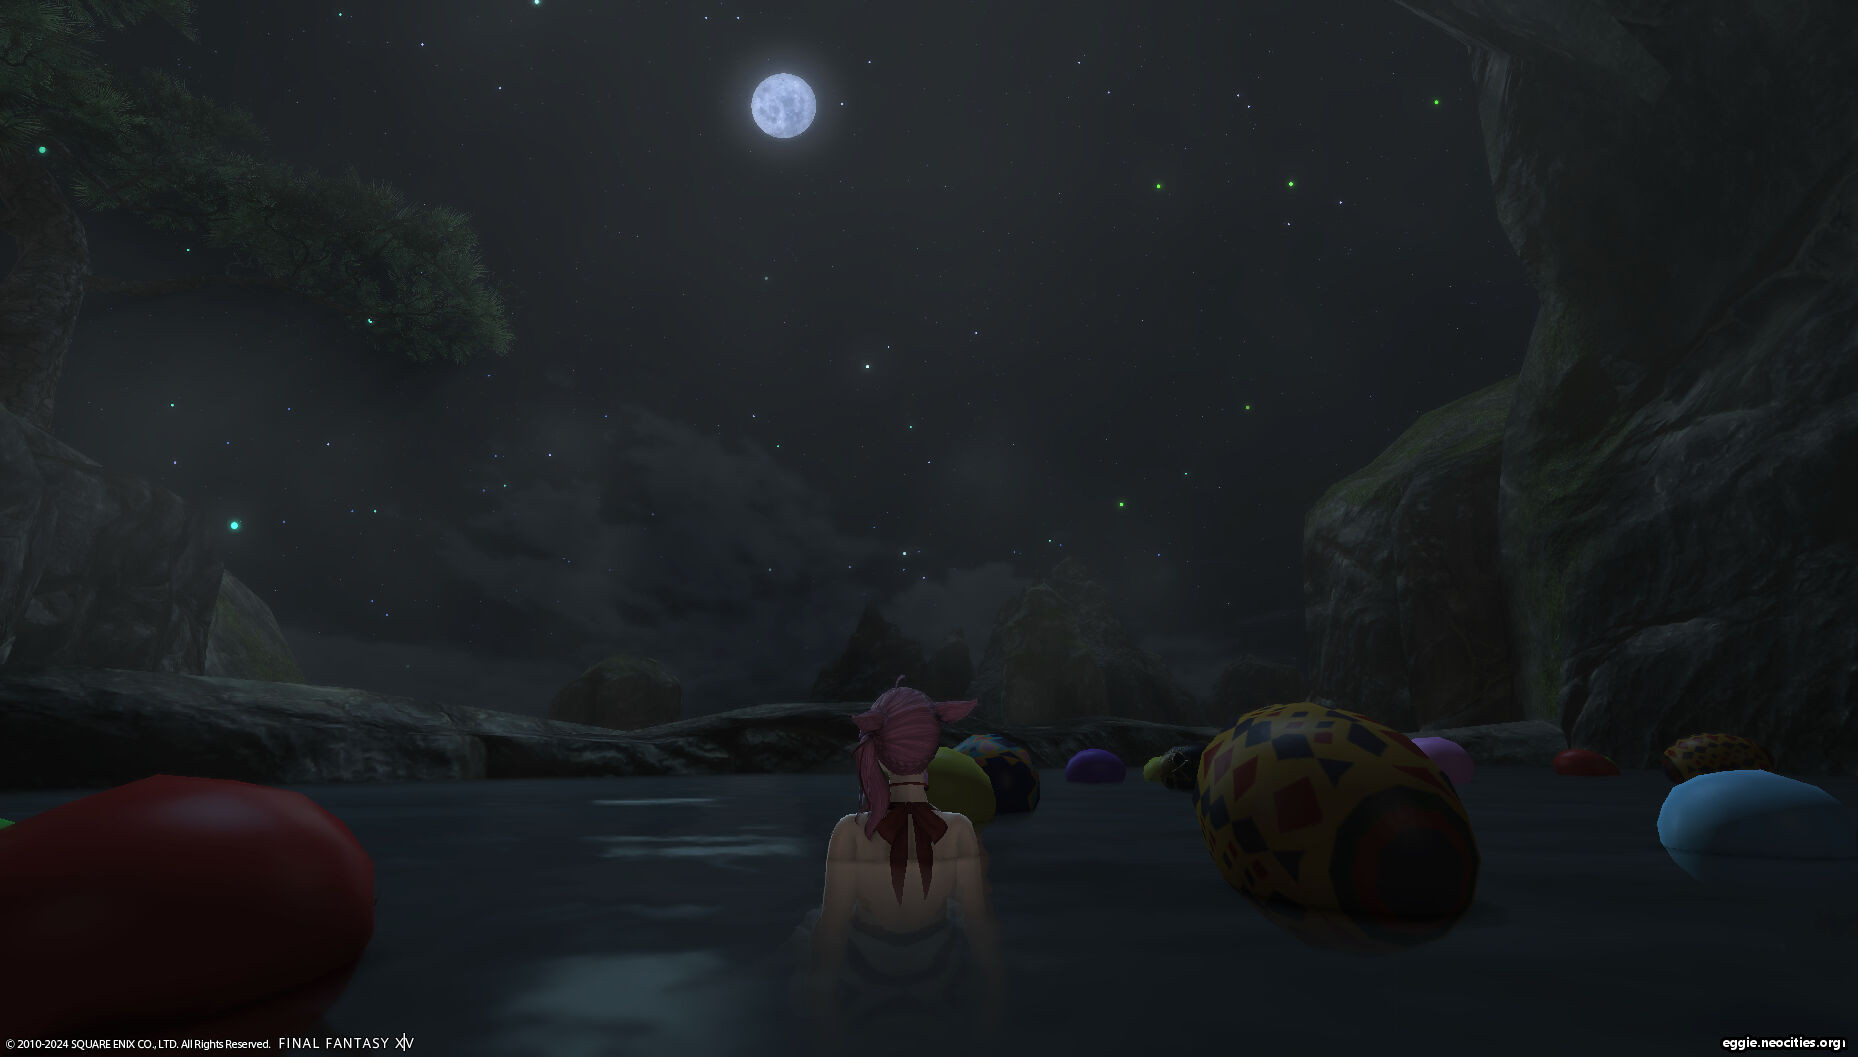 Zel sitting in the hidden hotsprings in Shirogane. There are several hatchingtide eggs scattered on the surface of the water.